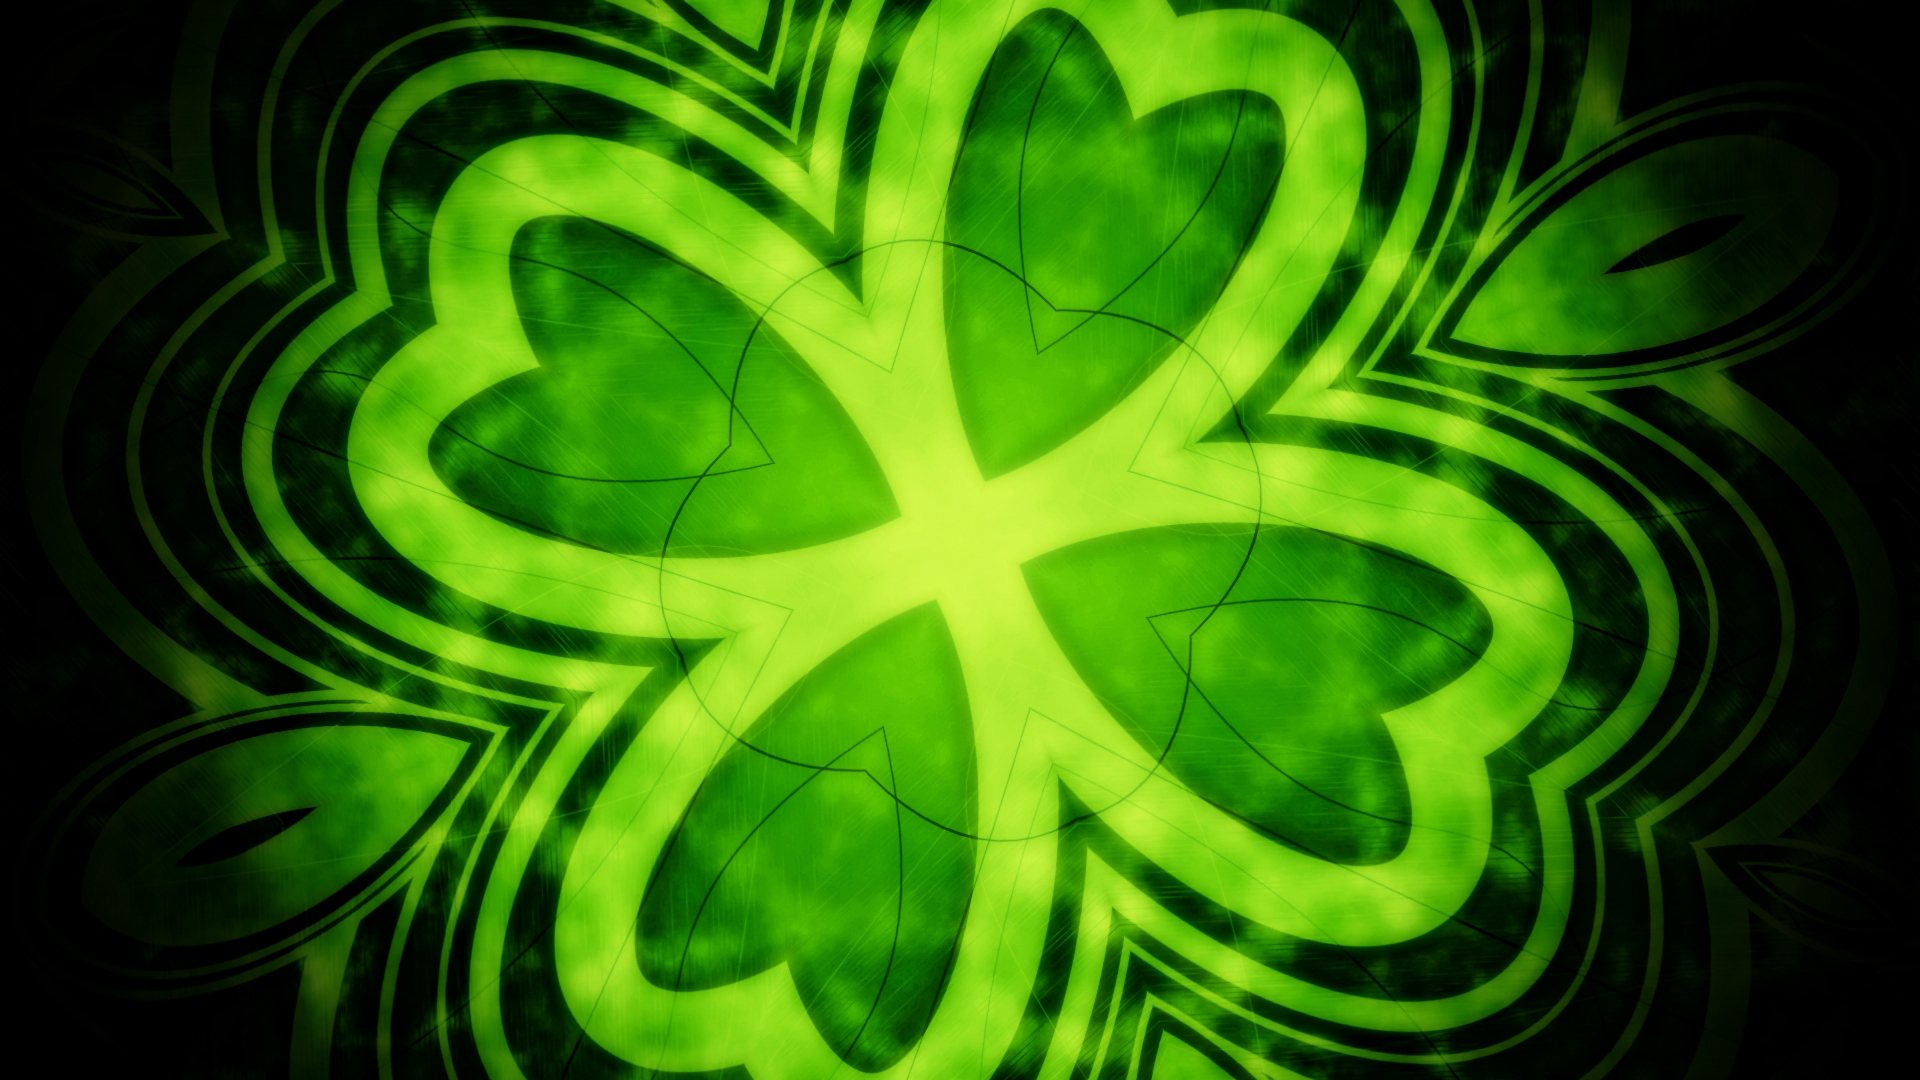 15 lucky Android wallpapers for St. Patricks Day AndroidGuys